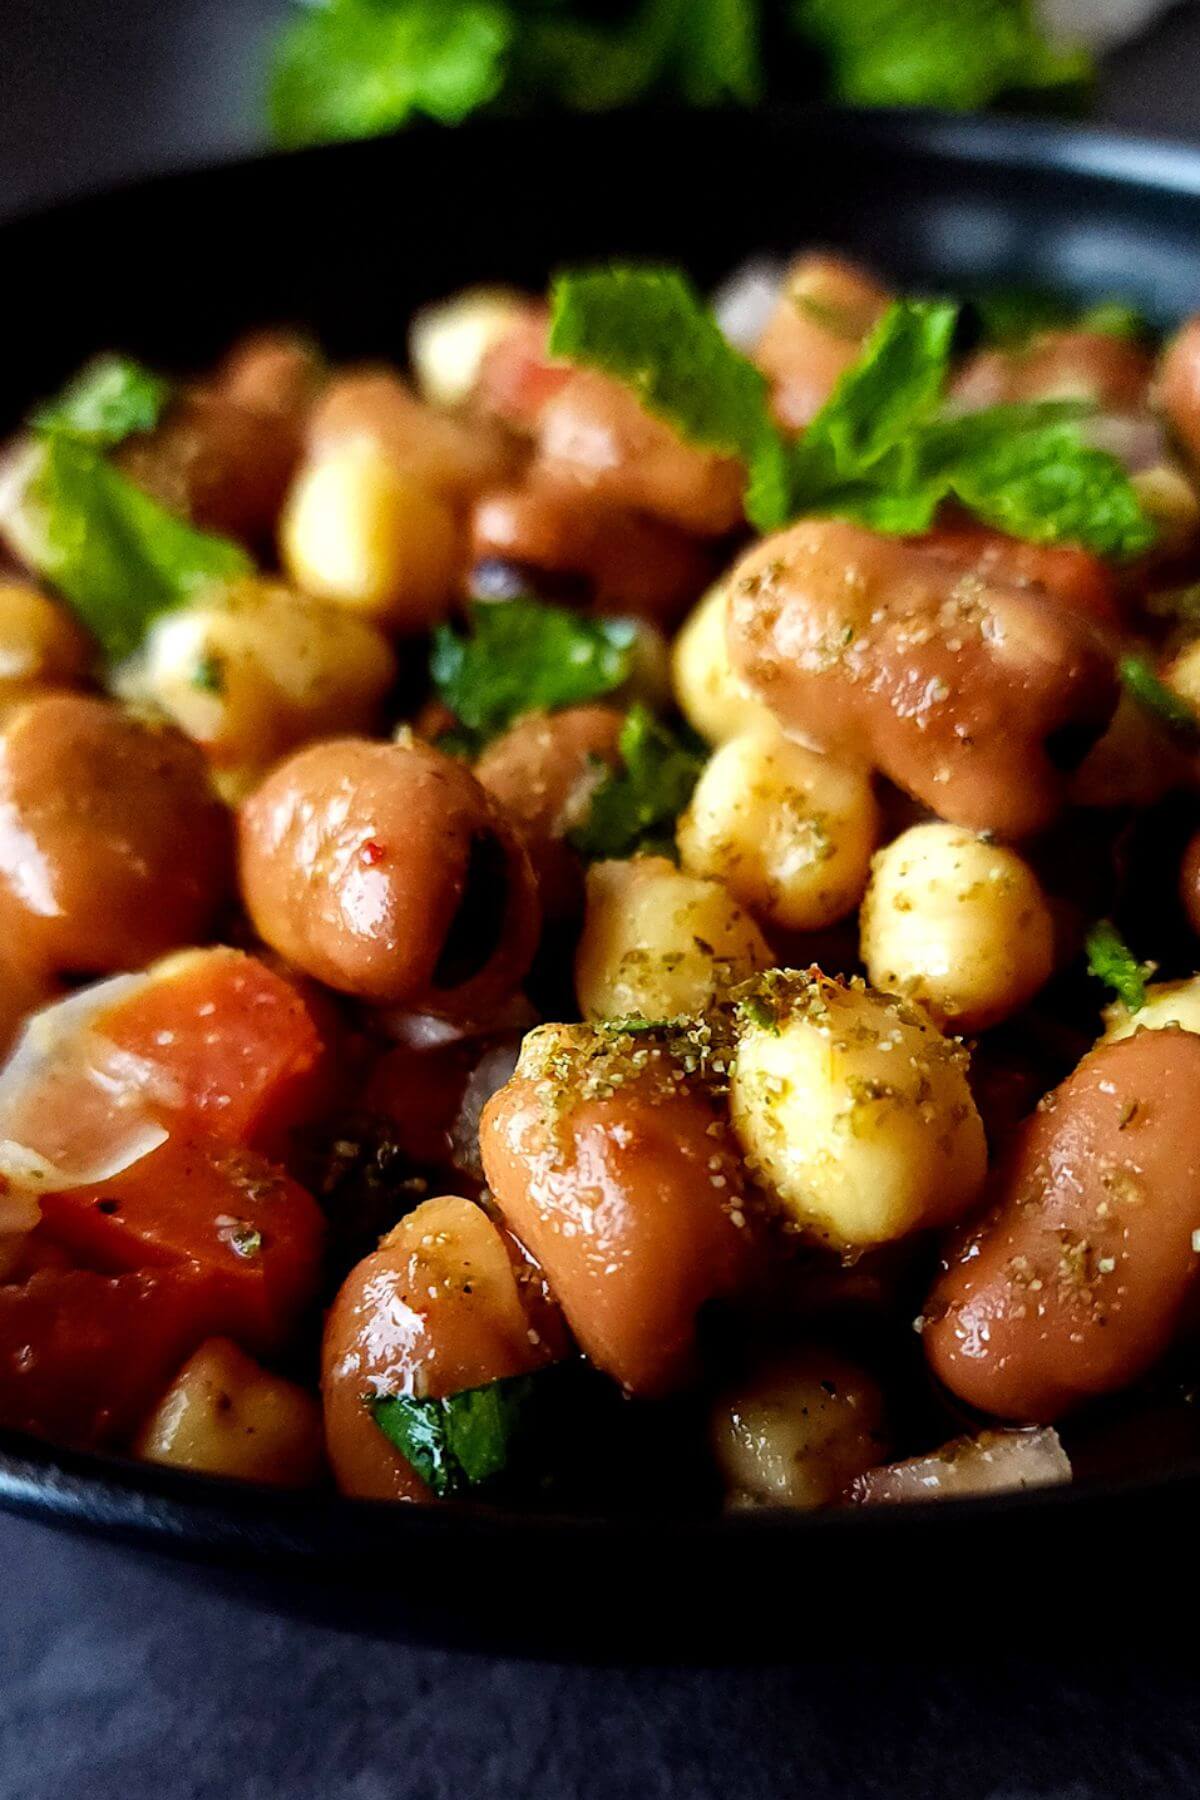 A bowl of fava bean and chickpea salad garnished with fresh herbs.